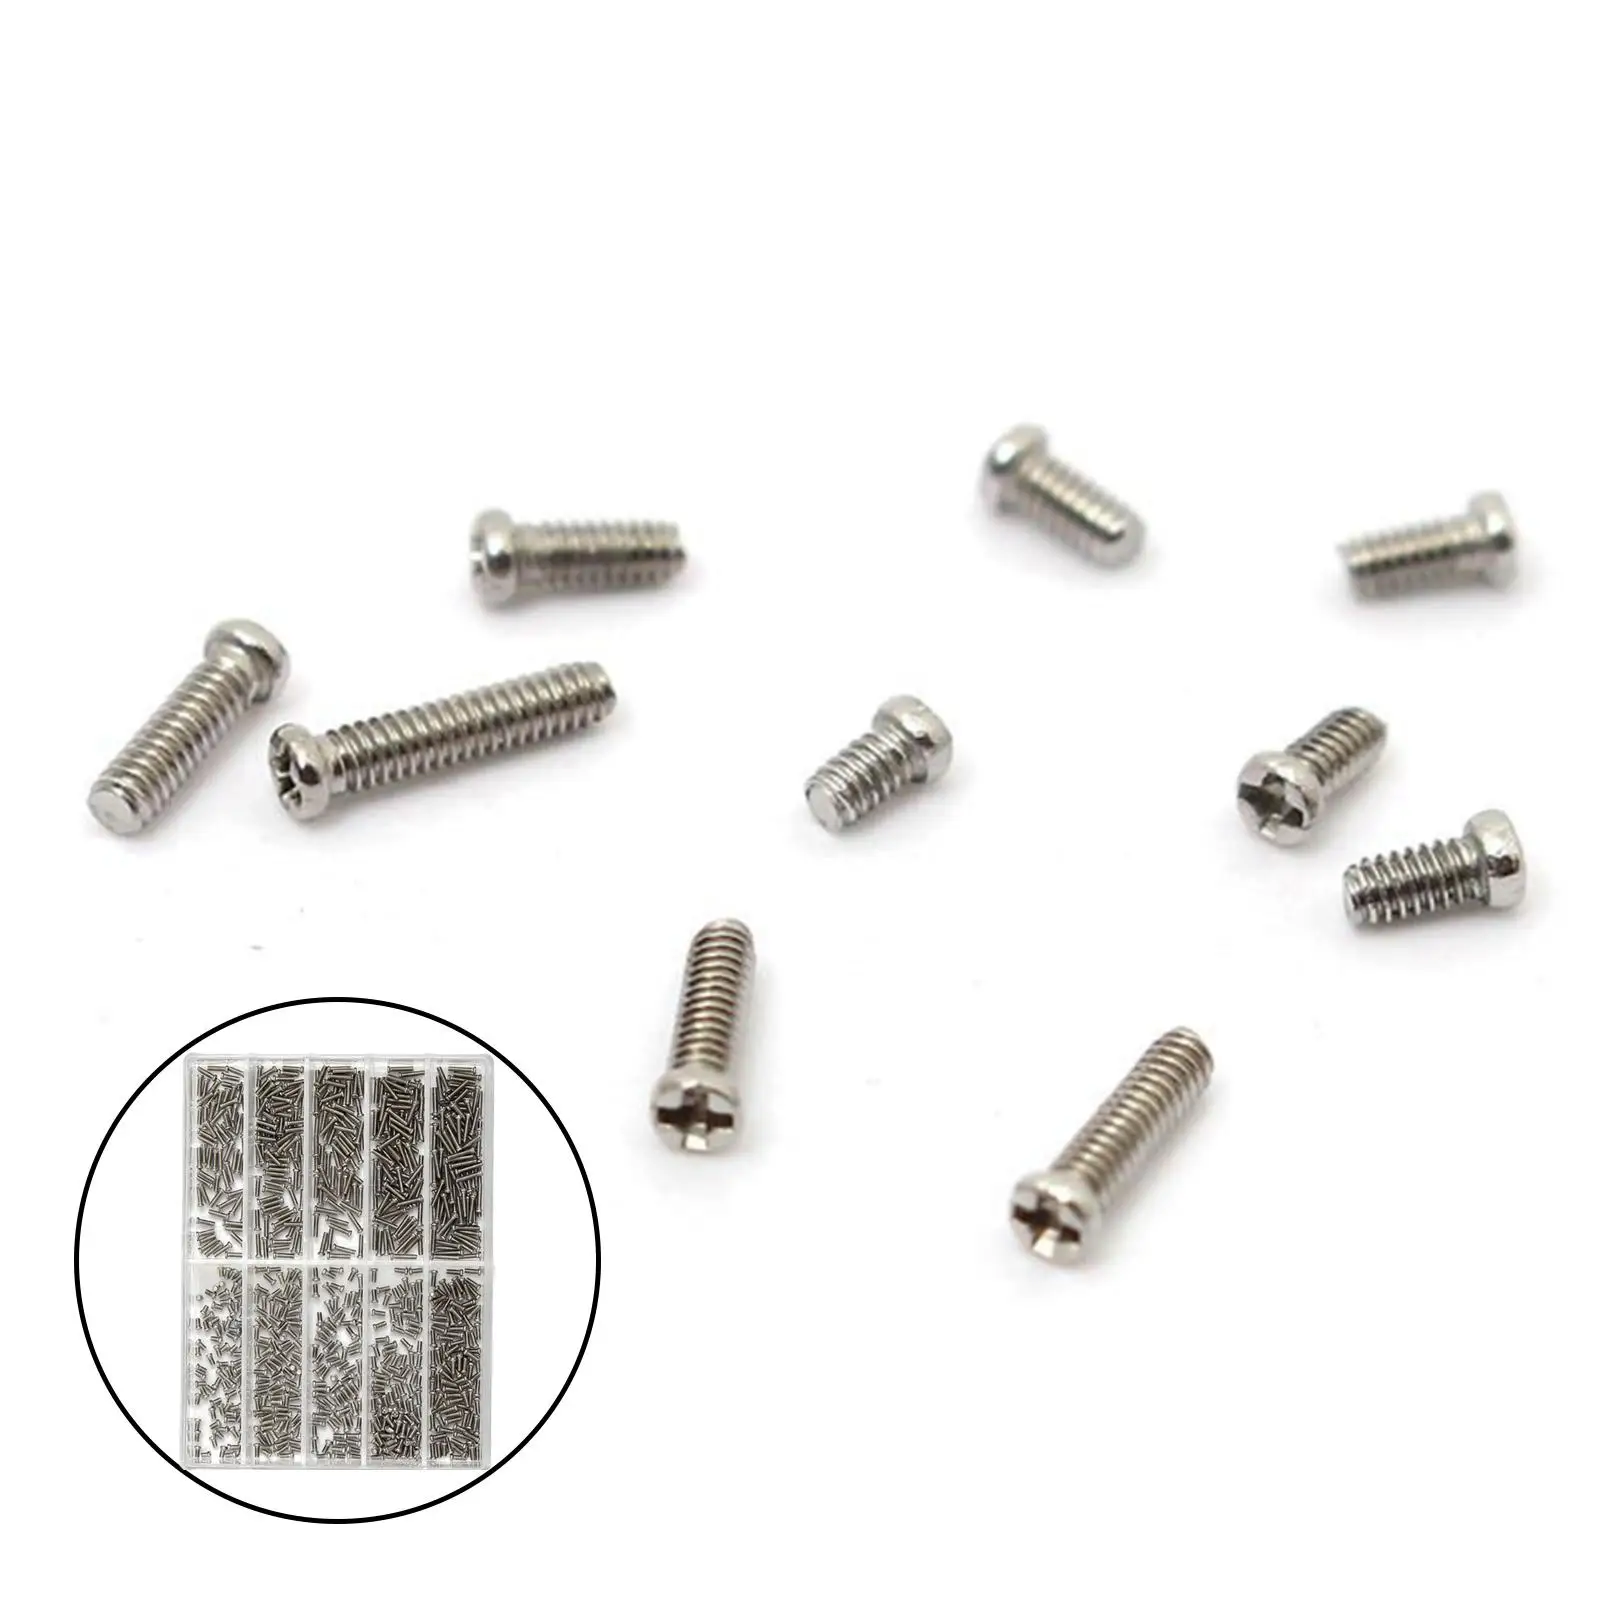  500PCS Cover Screw 1.6mm-6.0mm Multi-Specification Stainless Steel, Mini, 10 Different Sizes